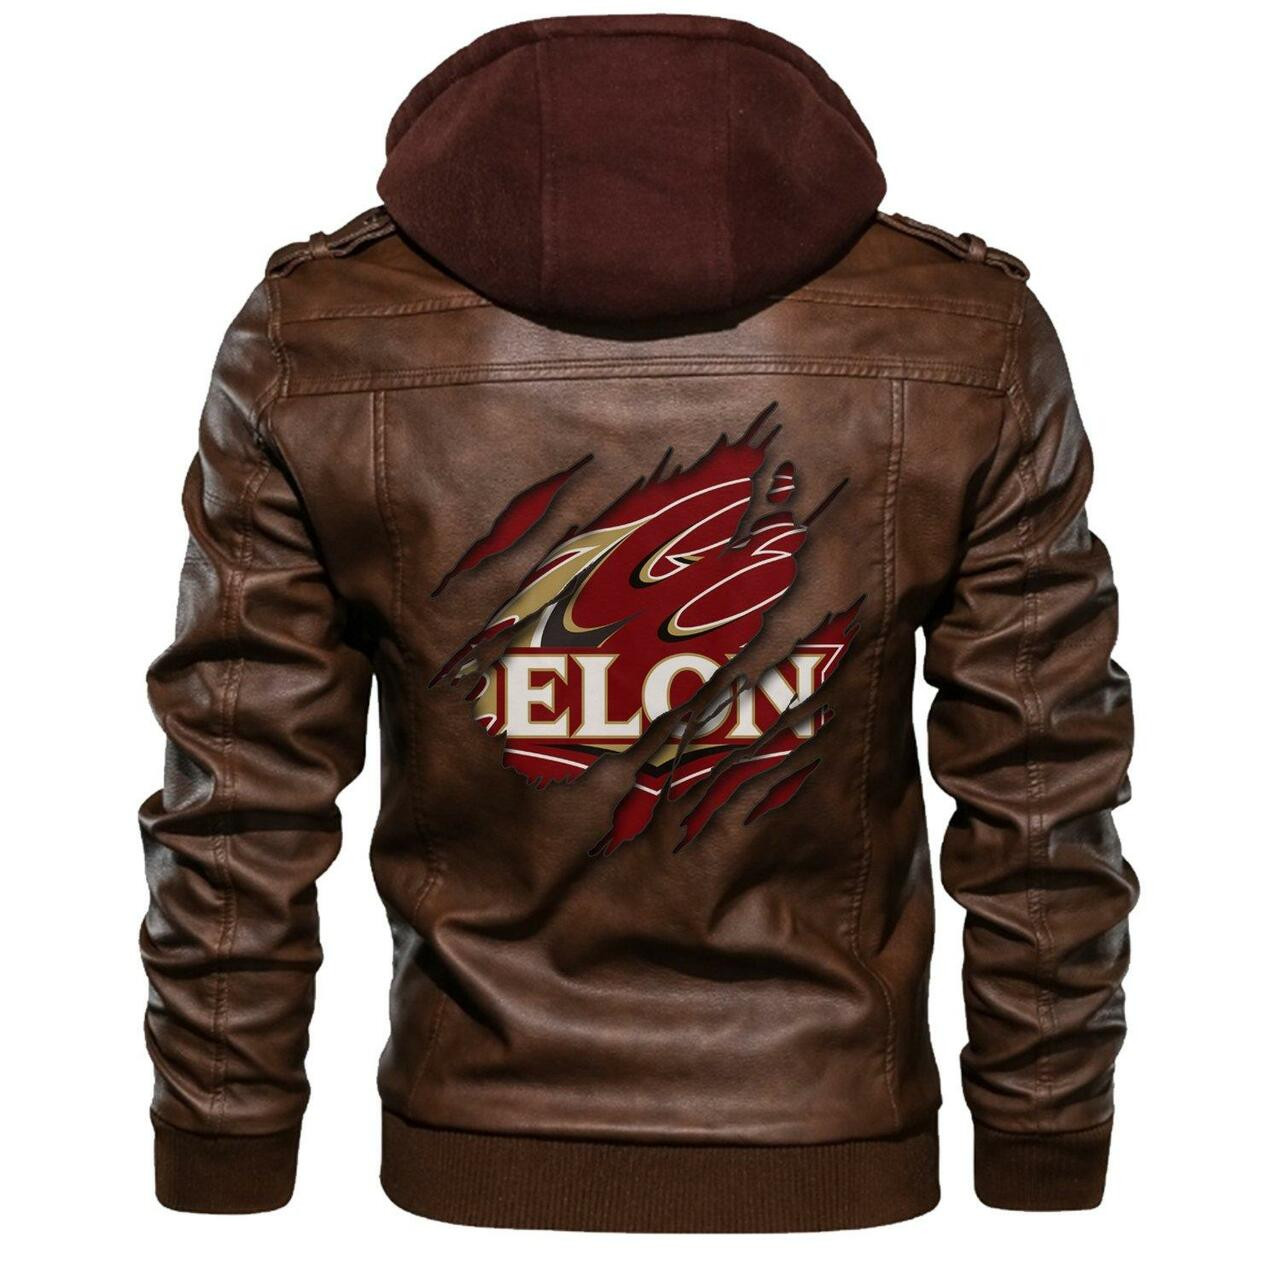 Check out and find the right leather jacket below 293